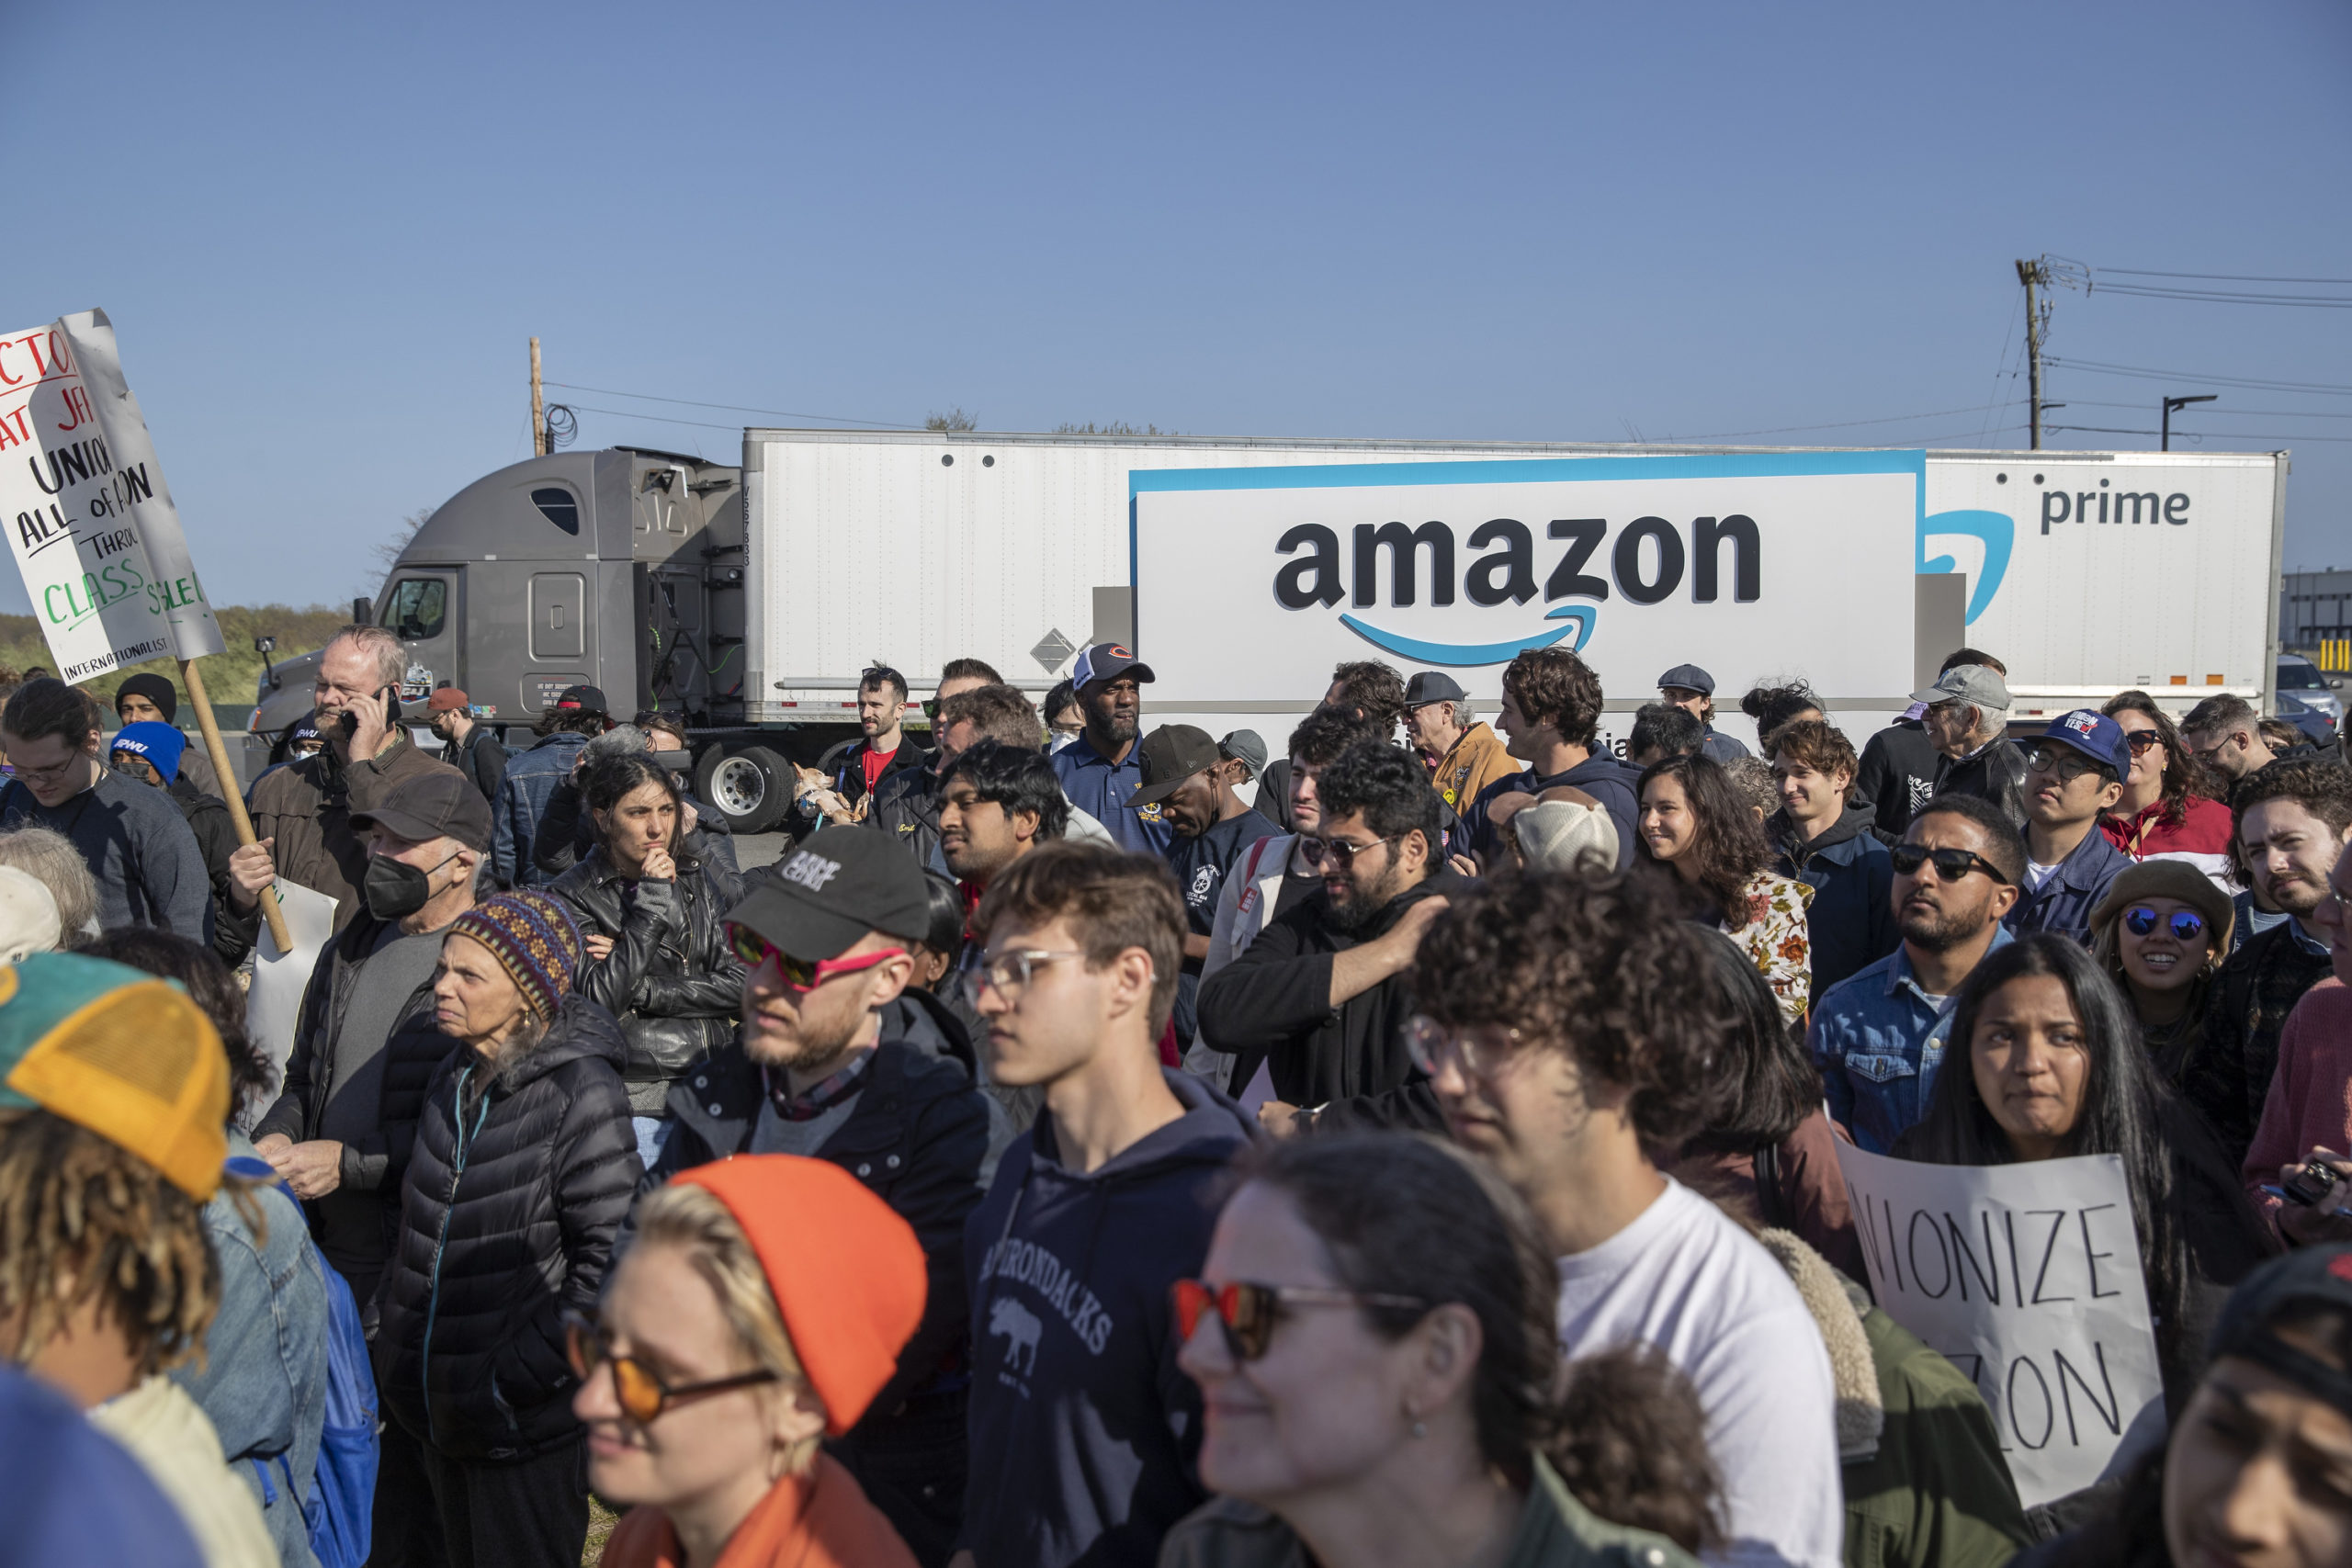 Amazon workers voted against high odds to unionize a New York warehouse. Negotiating a contract will be even tougher